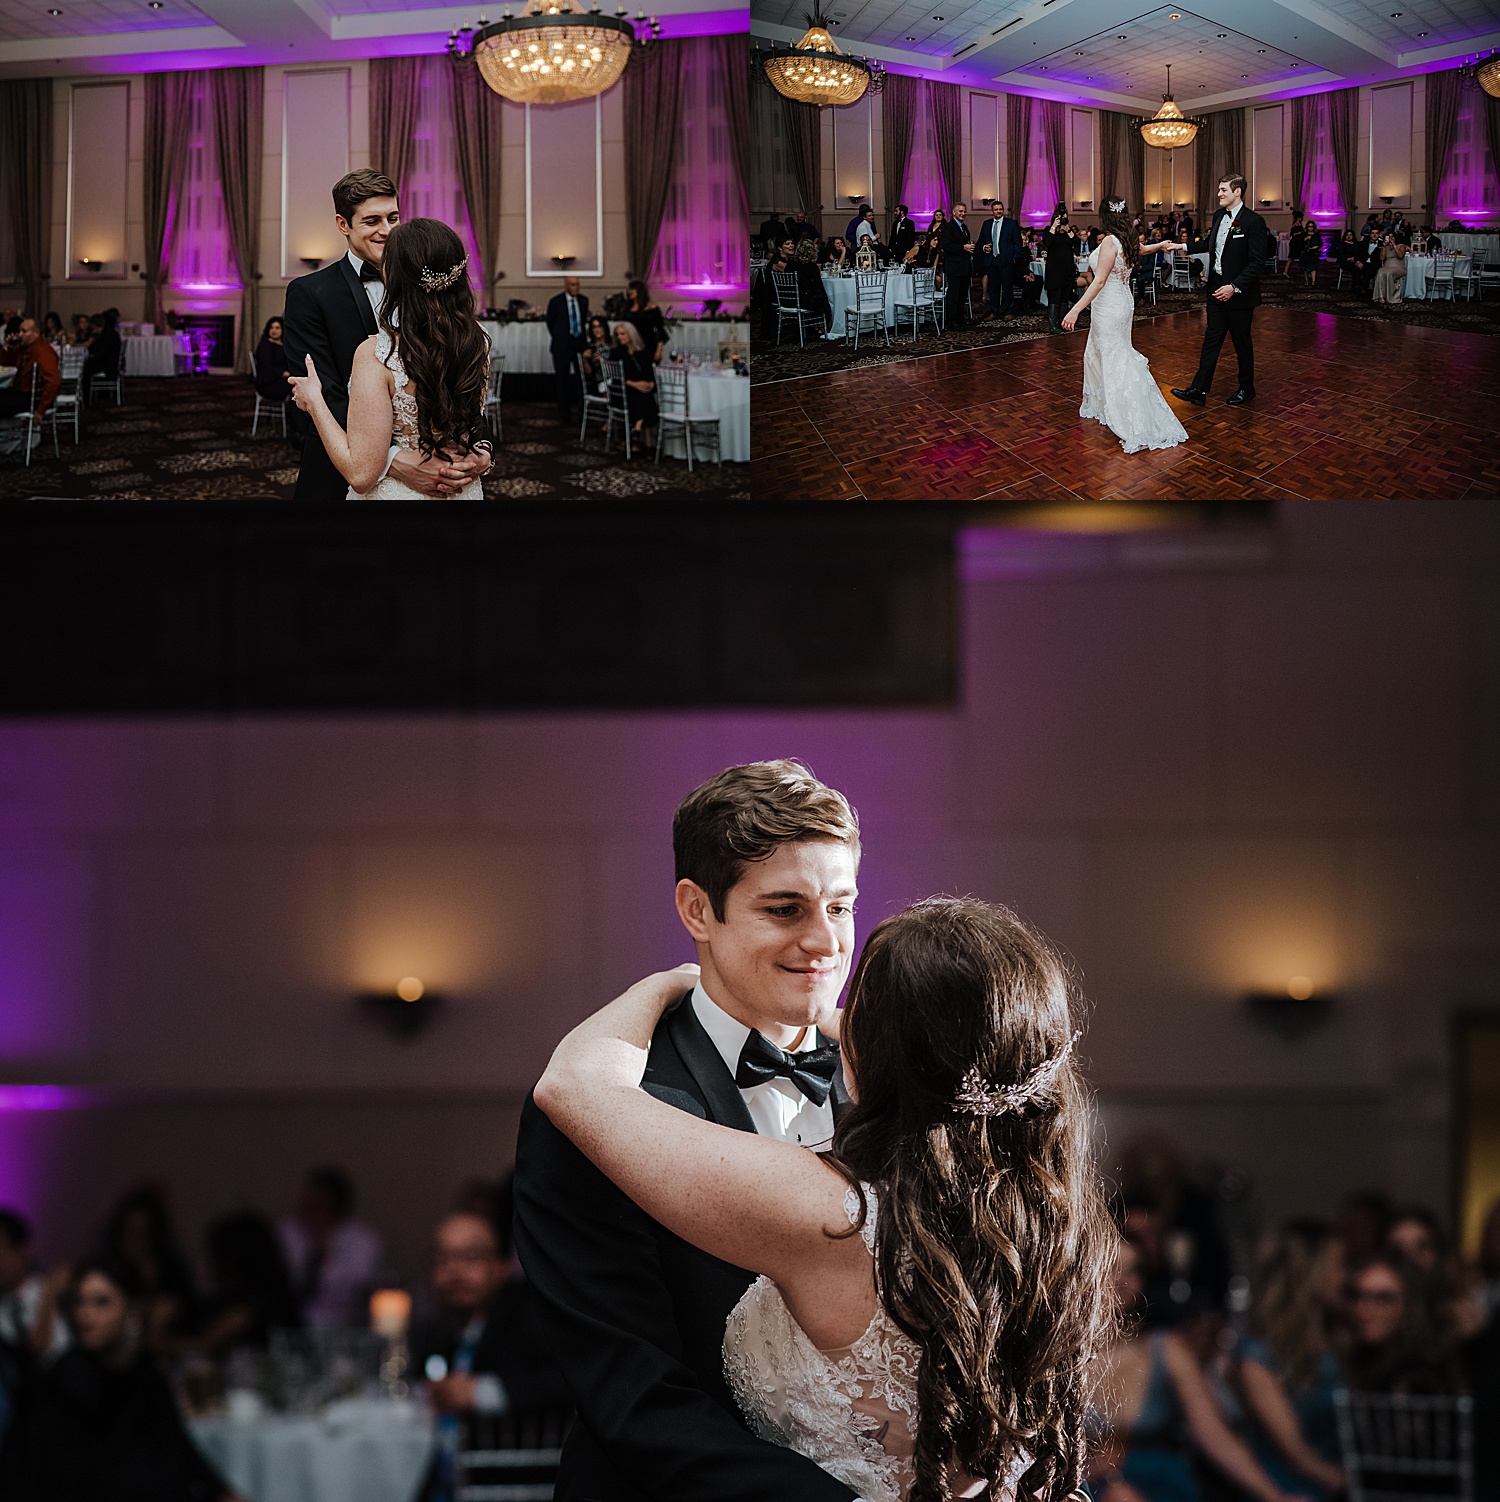 bride and groom share first dance during wedding reception 